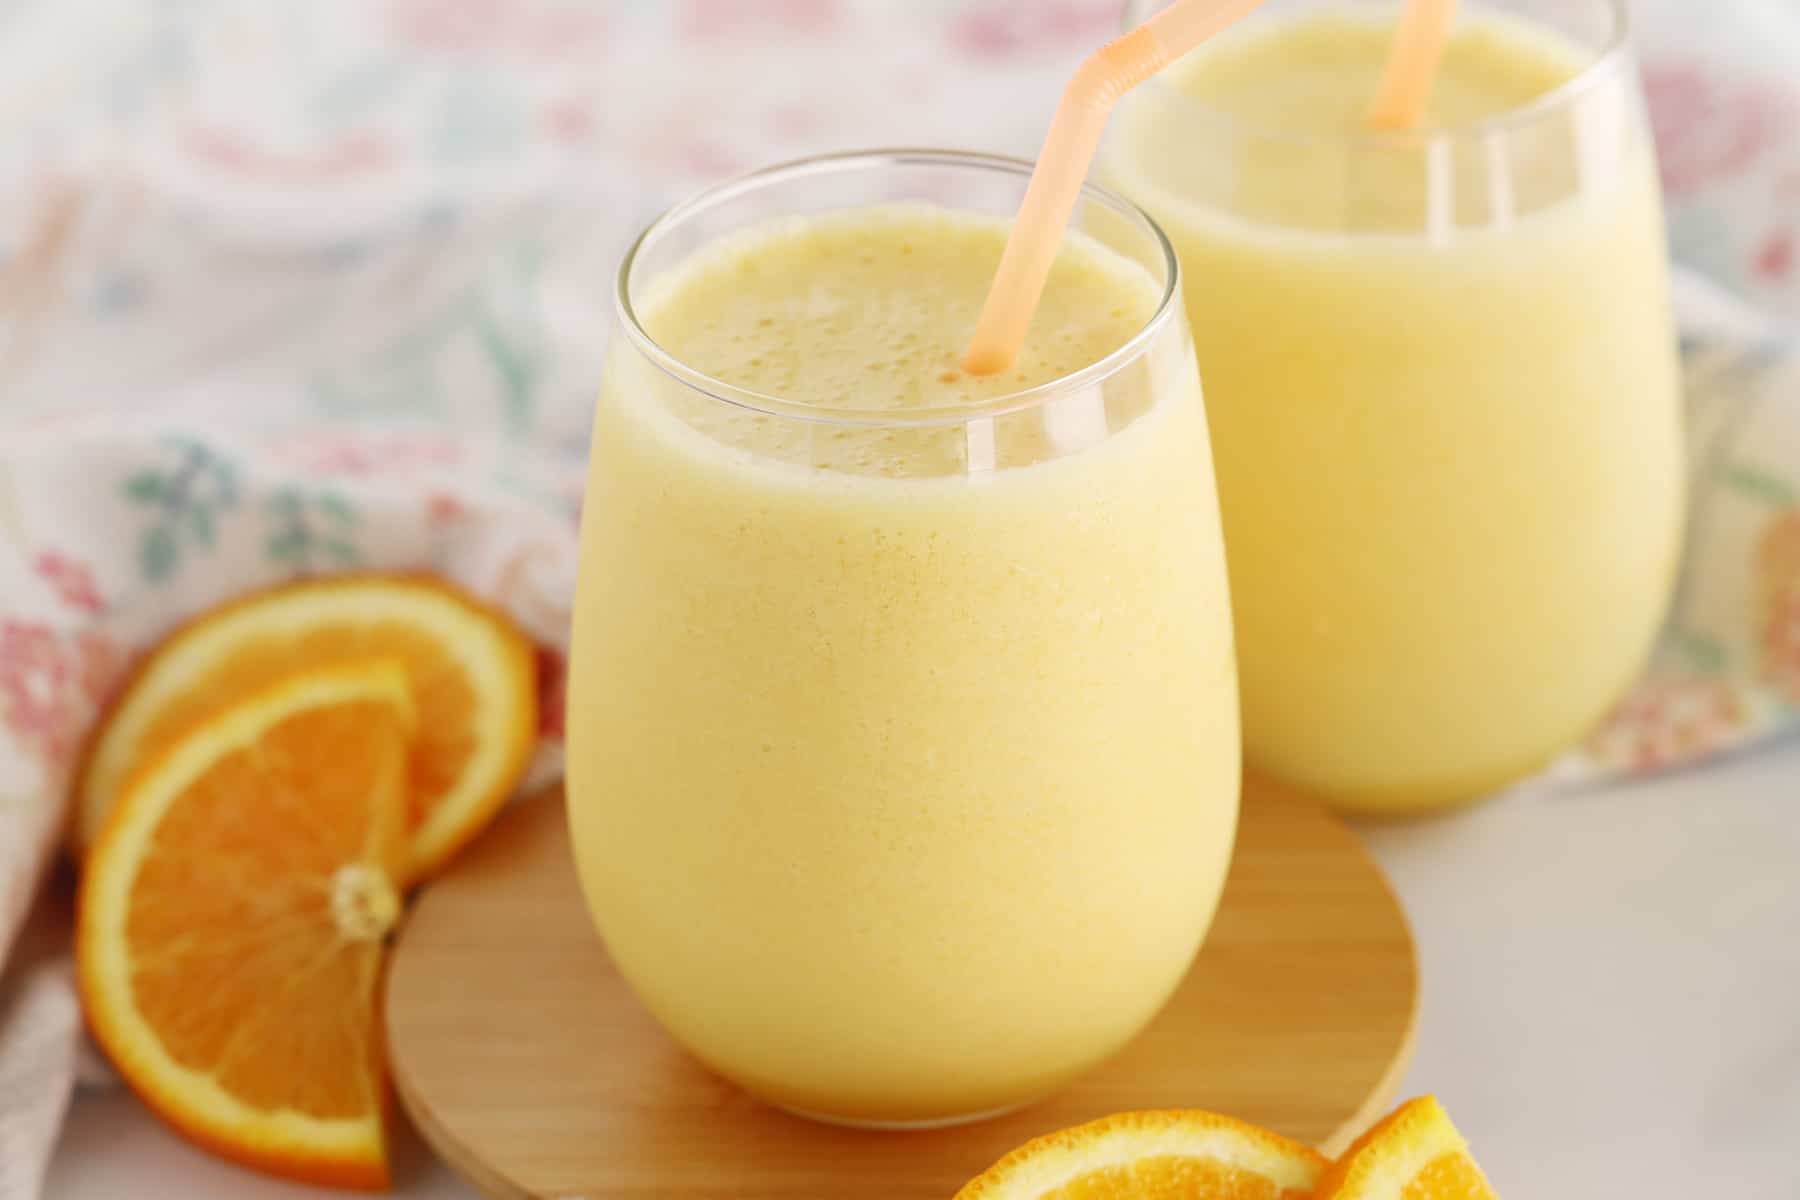 A table with an Orange Julius poured into a glass with a straw.